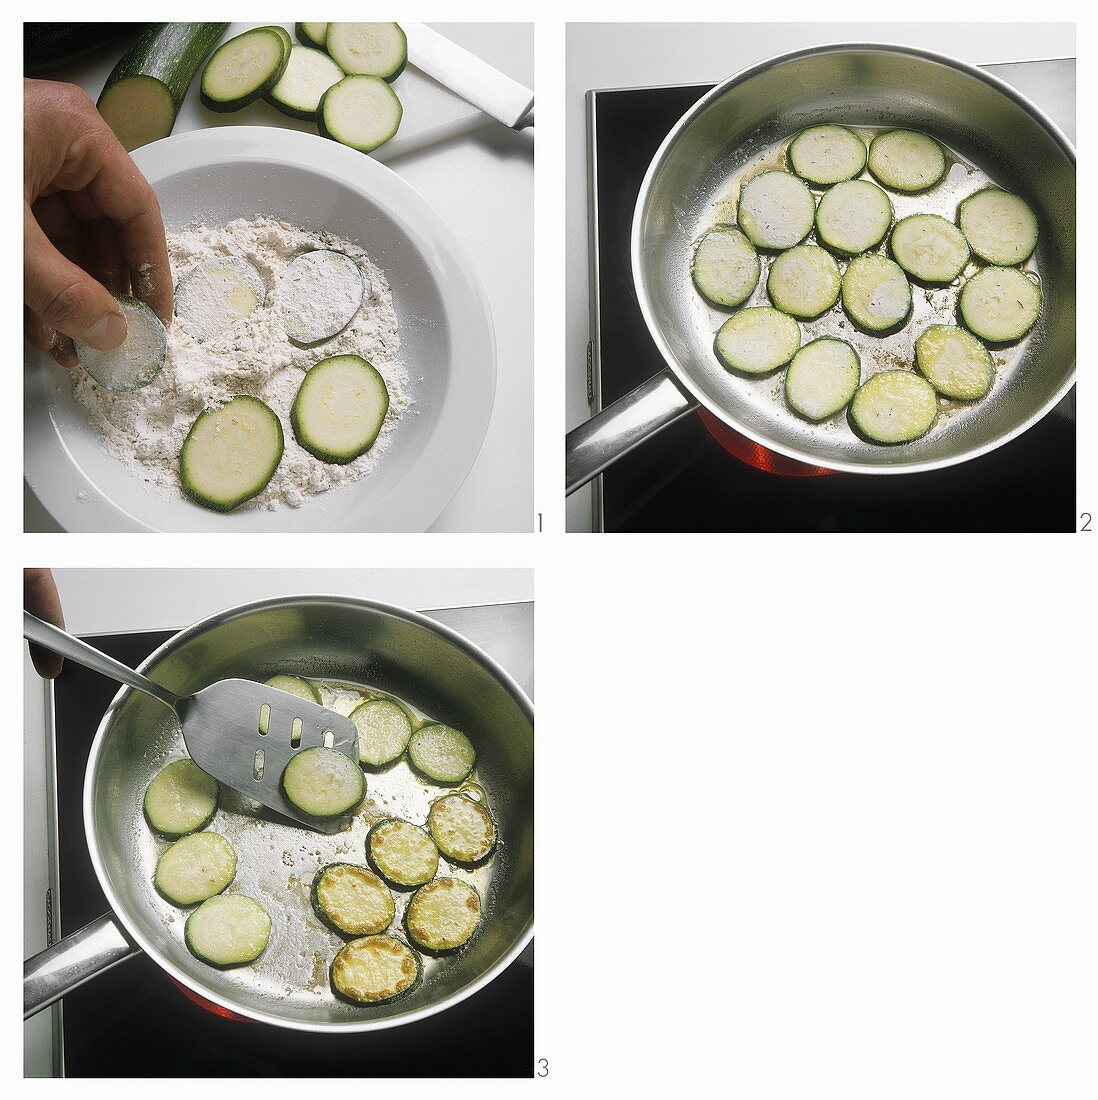 Coating courgettes in flour and frying them